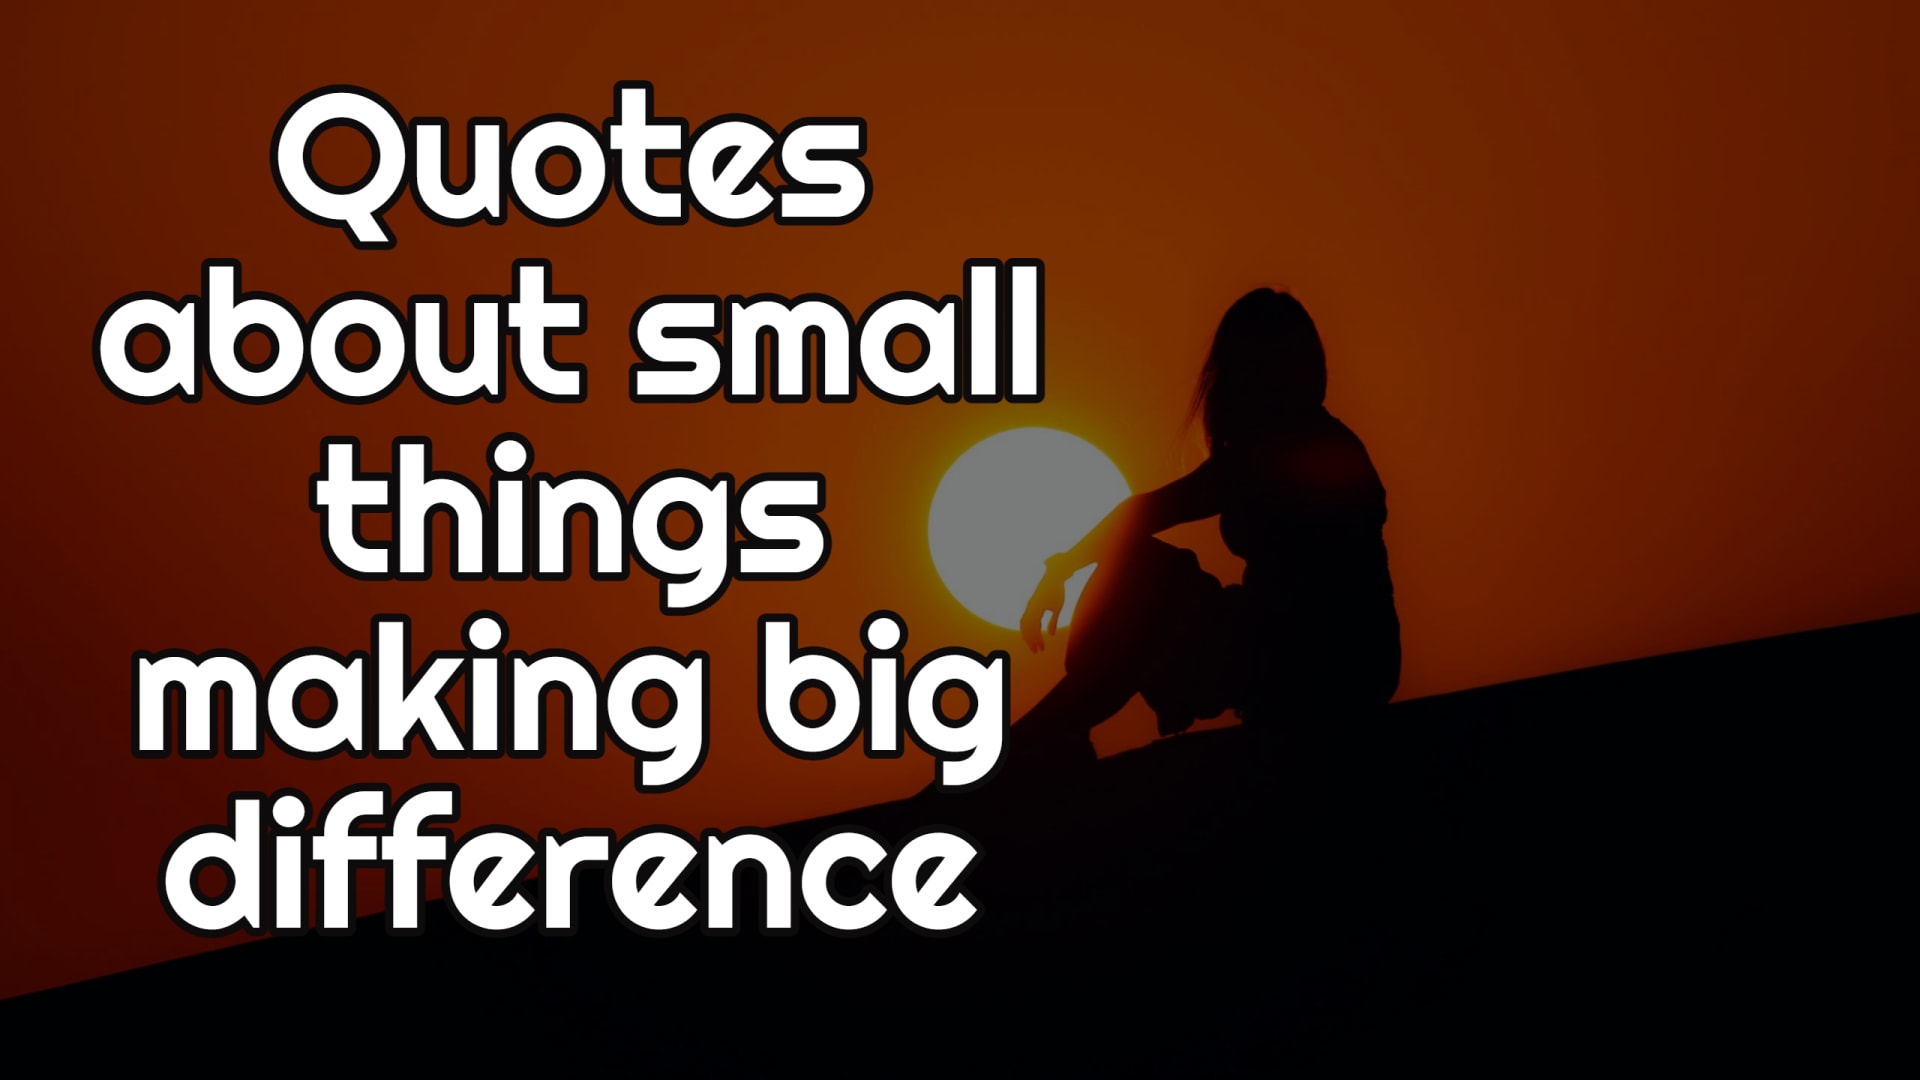 Quotes about small things making big difference